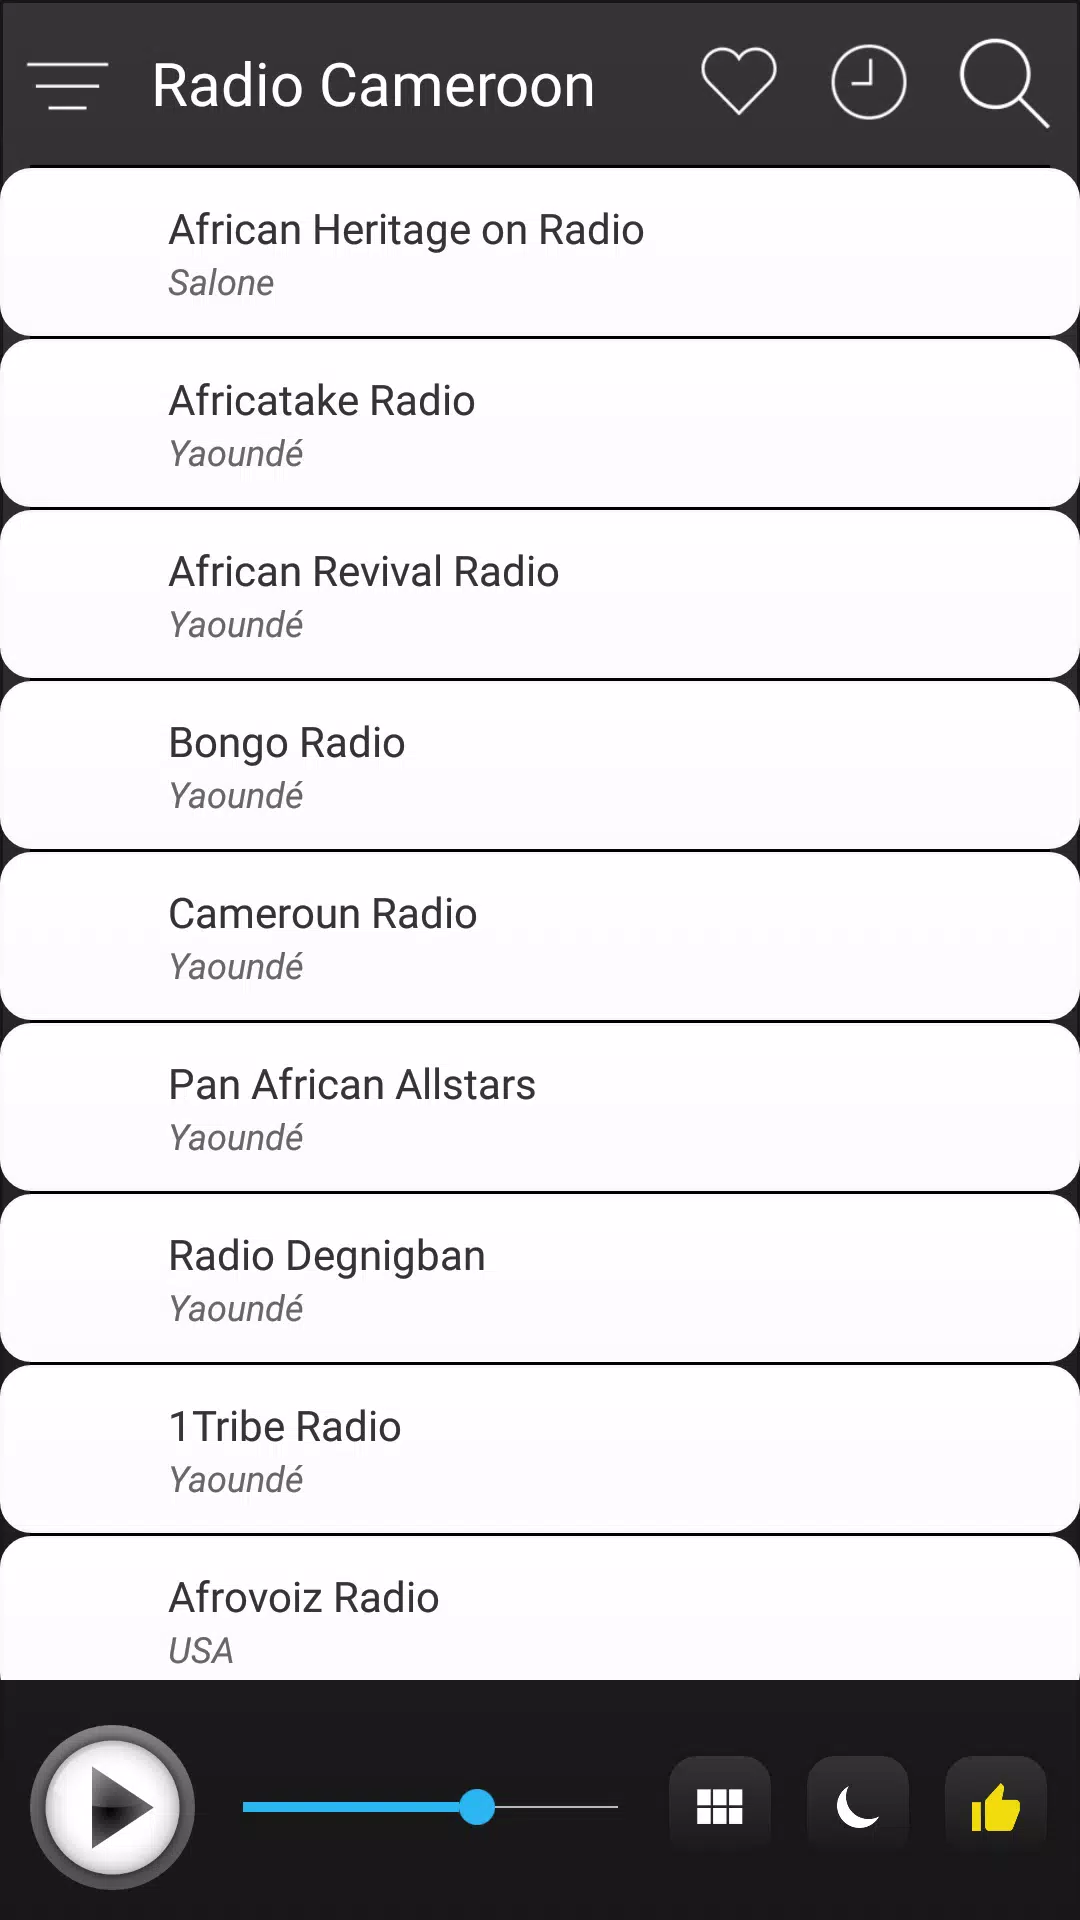 Cameroon Radio Stations Online - Cameroon FM AM for Android - APK Download